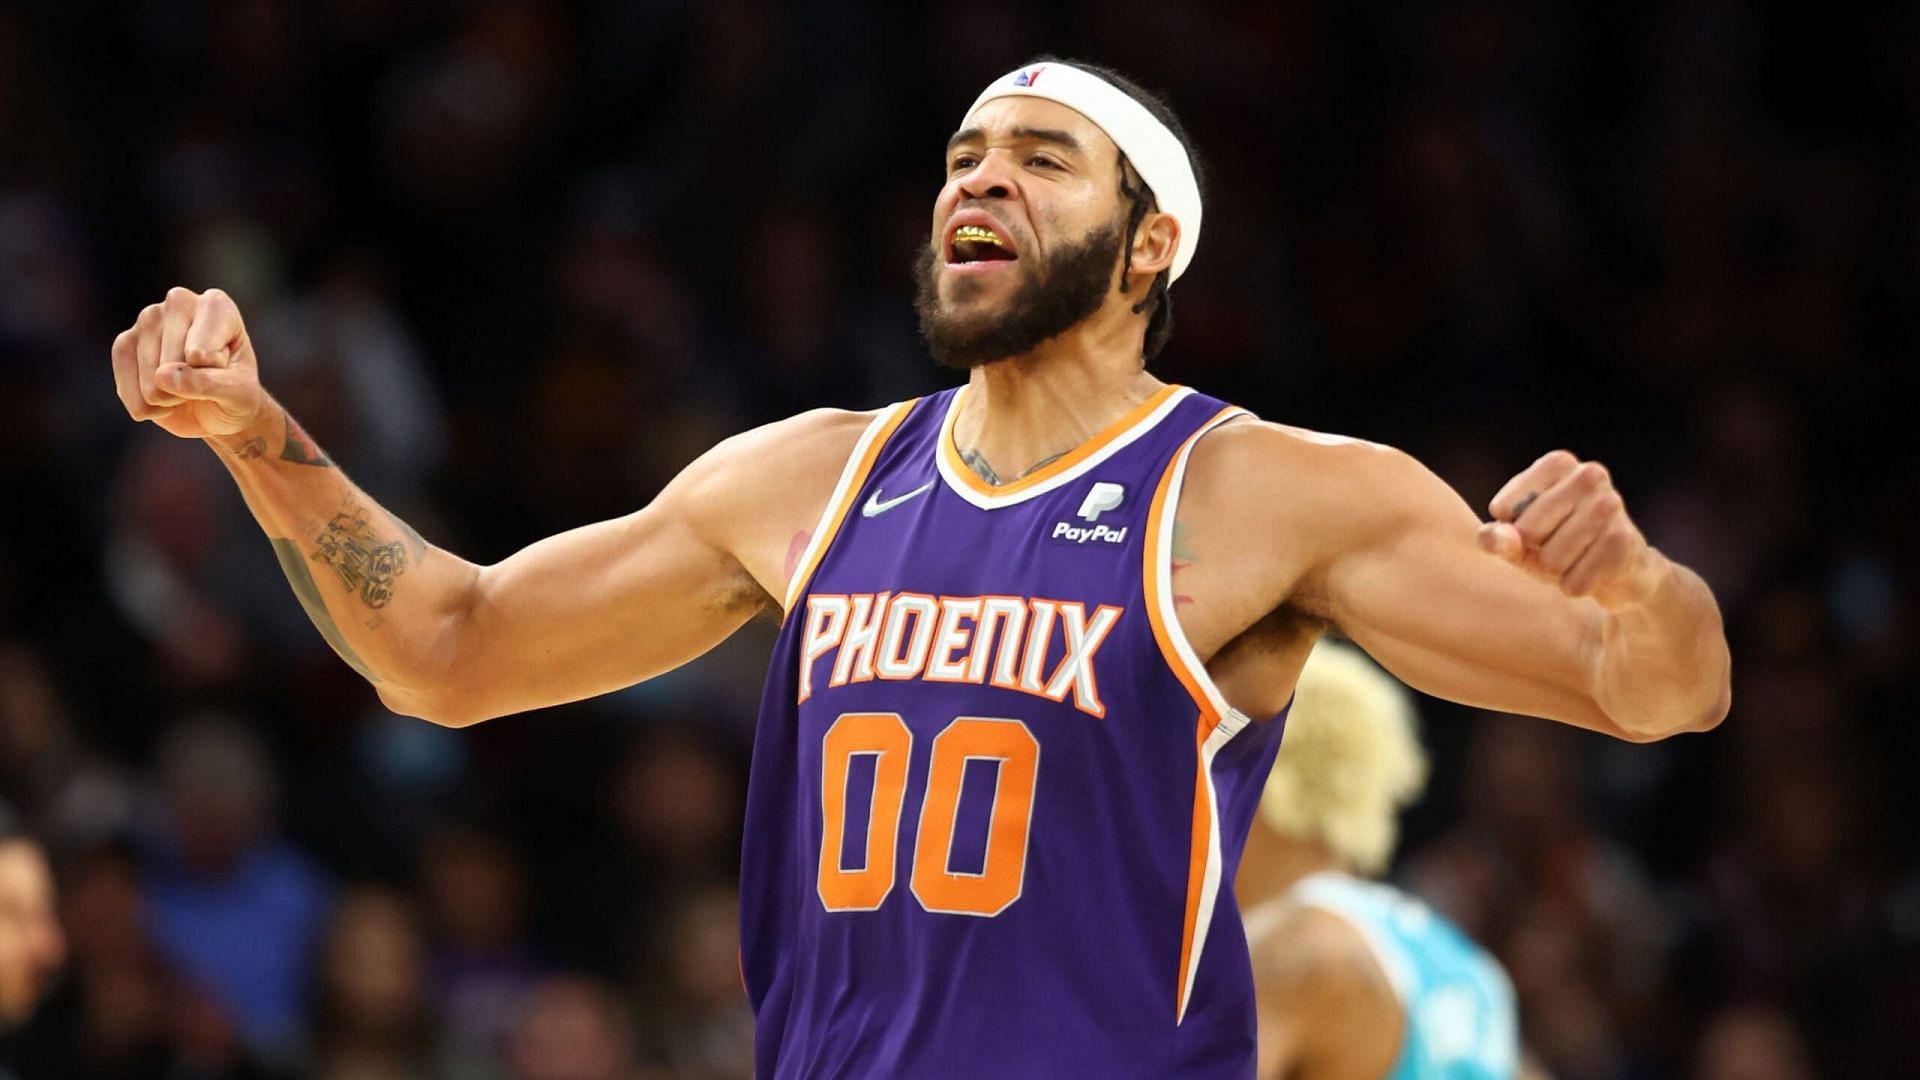 JaVale McGee during his time with the Phoenix Suns (Photo: NBA.com)